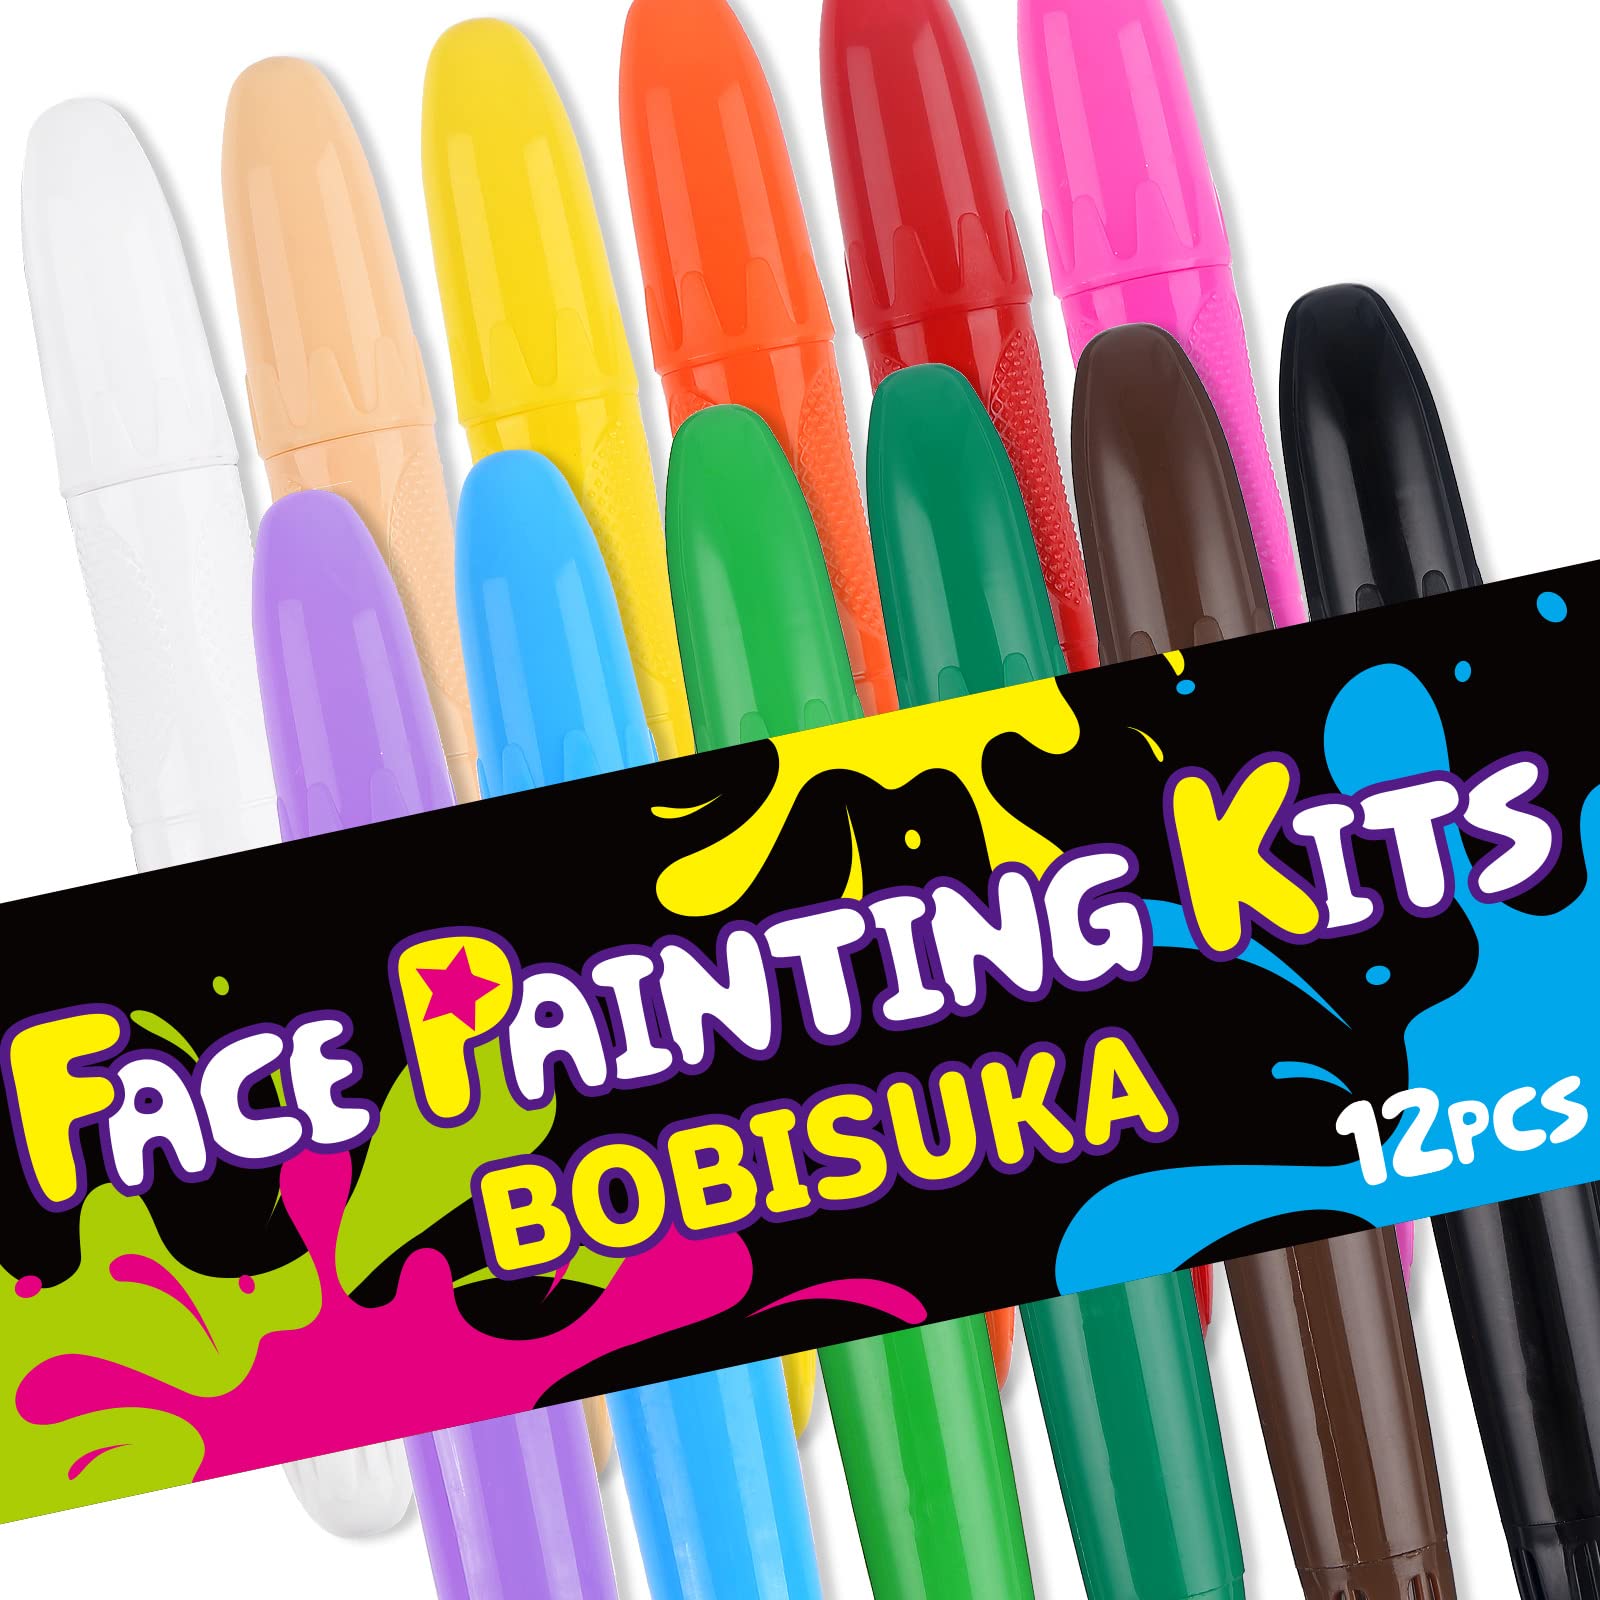 BOBISUKA Face Painting Kit for Kids - 16 Colors Water Based Body Face Paint  Includes Brushes,Sponges,Glitters,Gem Sheet,Instructions,Stencils for  Halloween Party Costume SFX Makeup